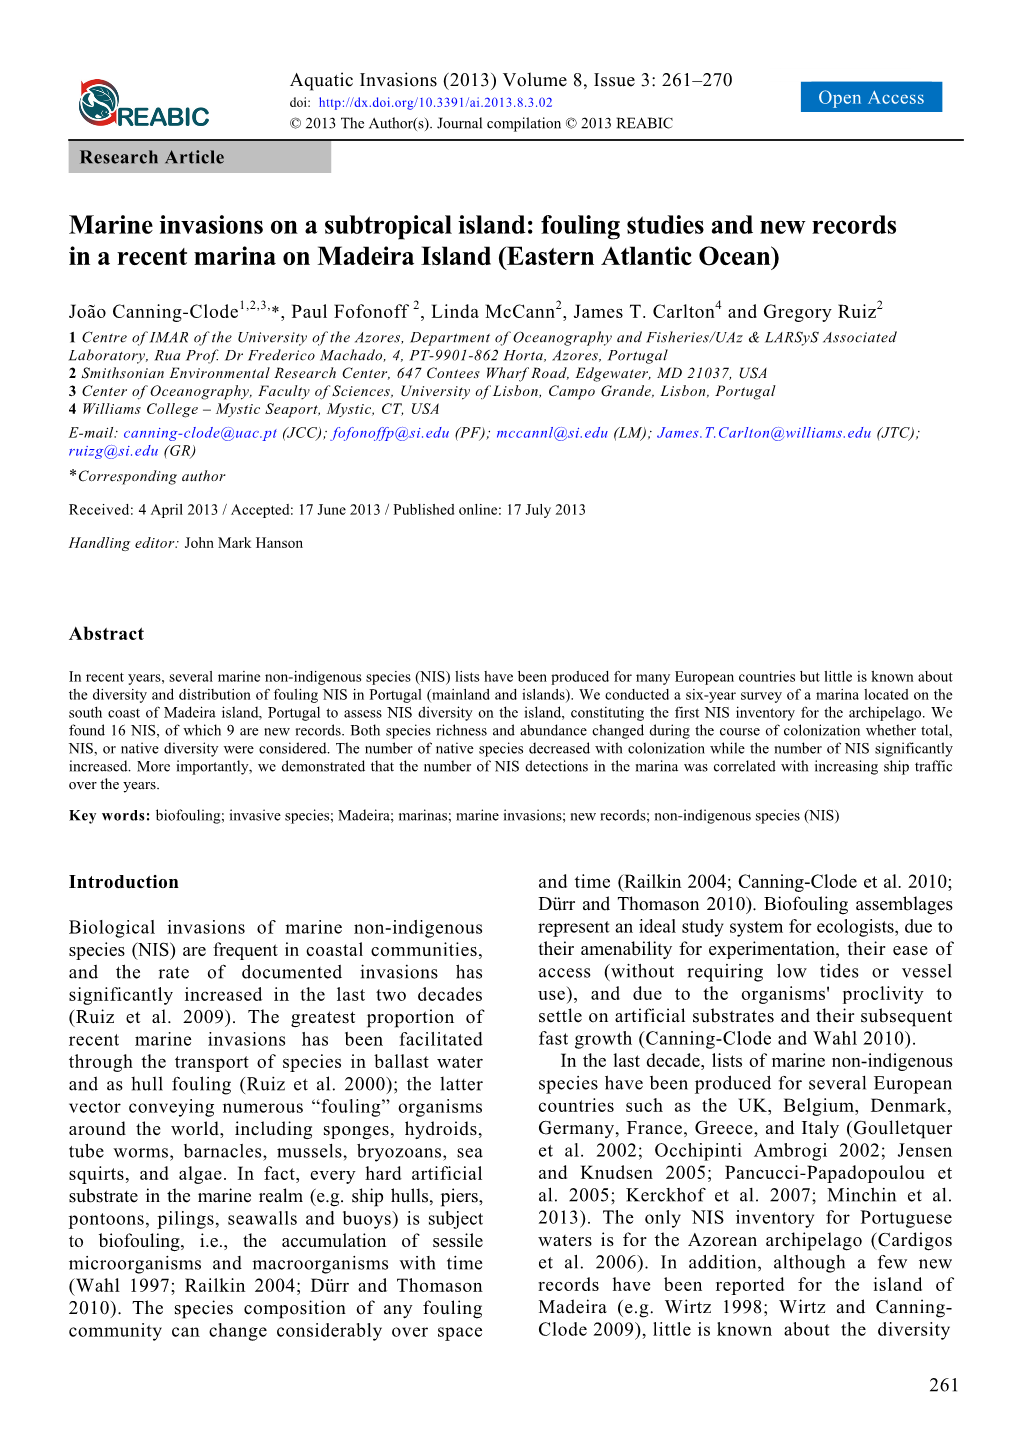 Marine Invasions on a Subtropical Island: Fouling Studies and New Records in a Recent Marina on Madeira Island (Eastern Atlantic Ocean)